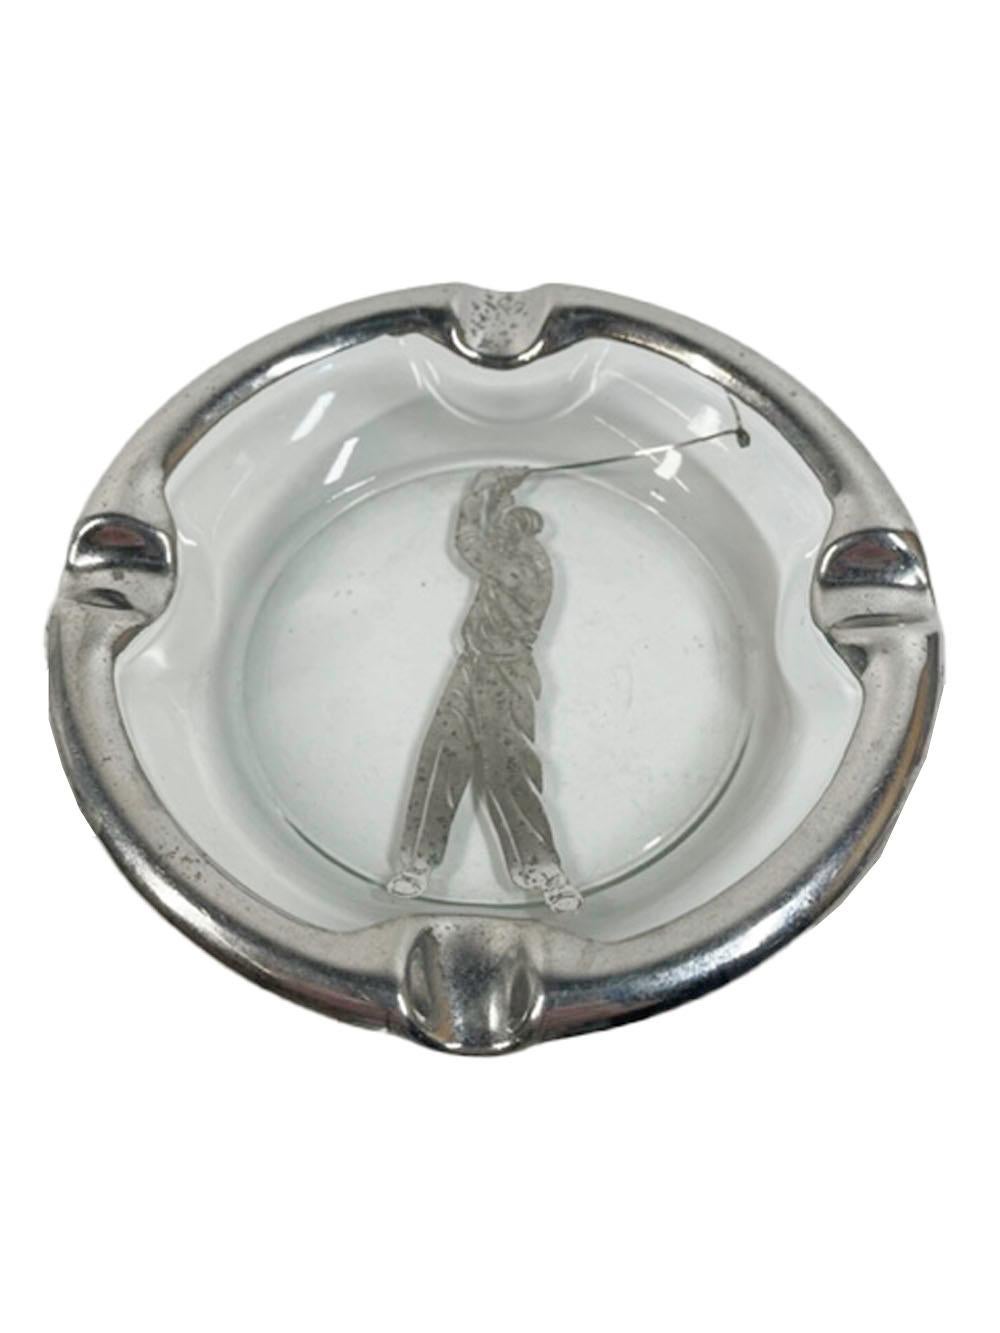 Vintage silver overlay ashtray by the Rockwell Silver Company, of circular form with a 4-divot silver overlay rim centering a golfer swinging his club.